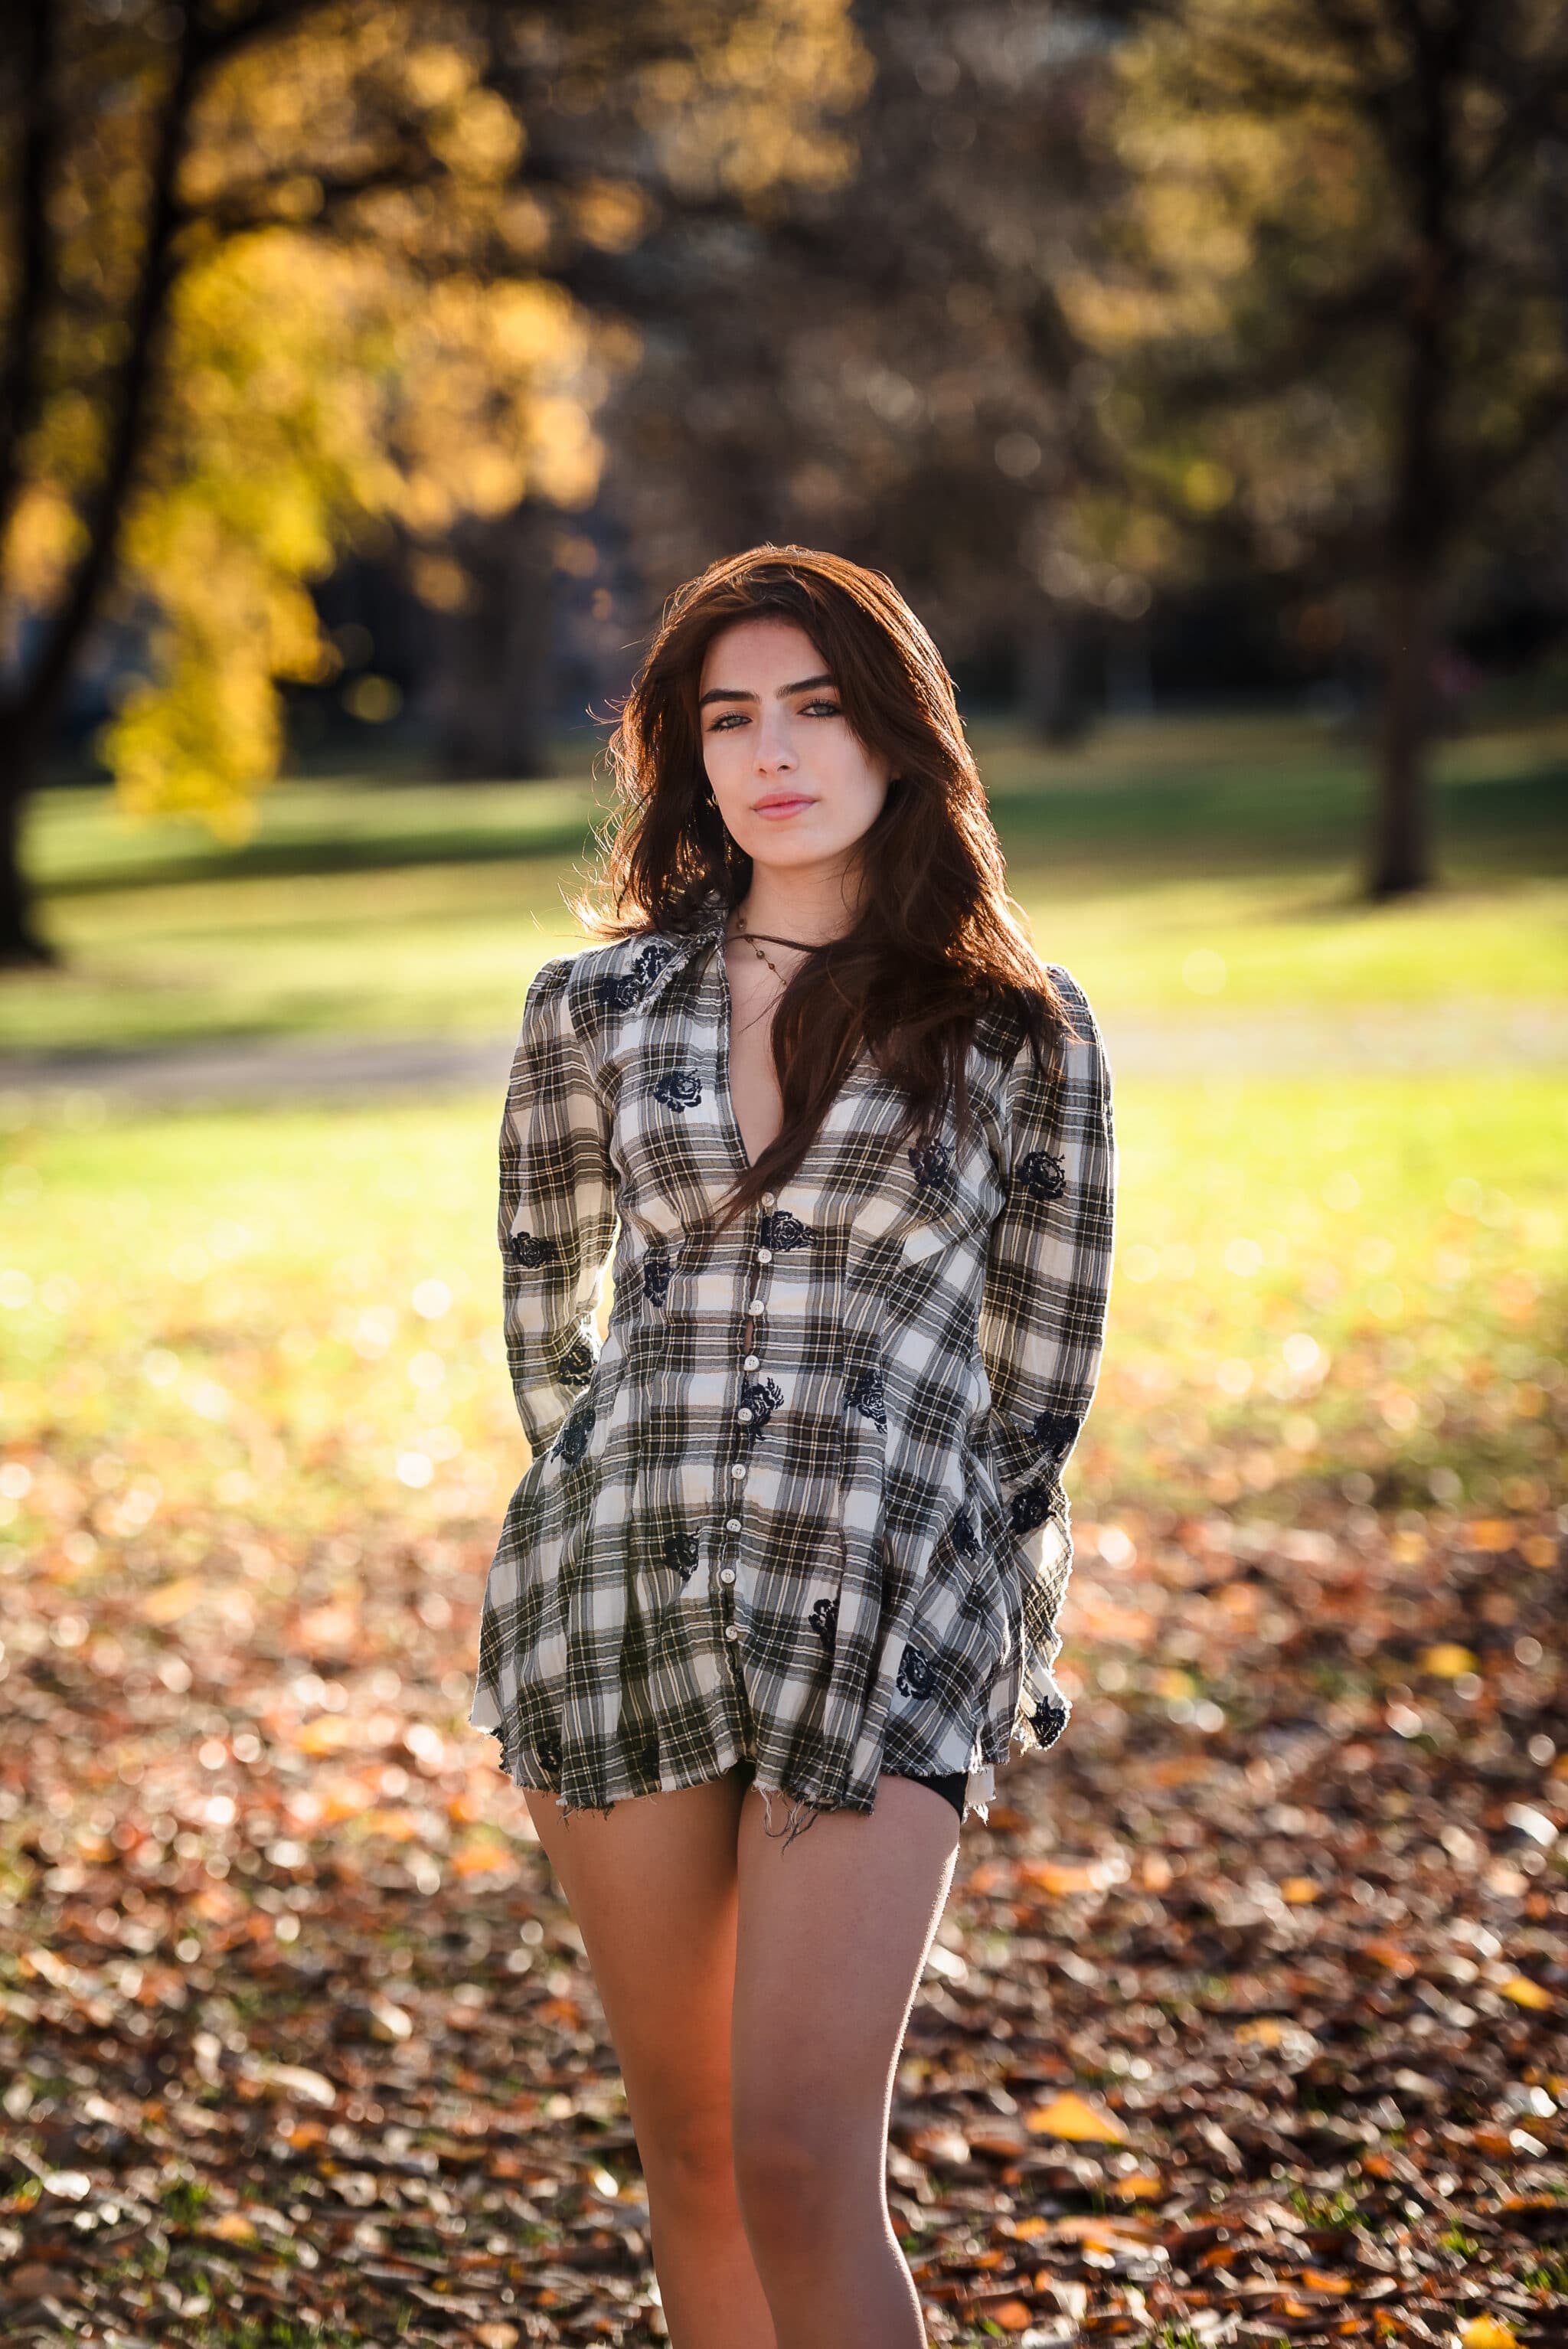 A young woman stands in a pile of leaves with the fall foliage surrounding her at City Park, Denver.